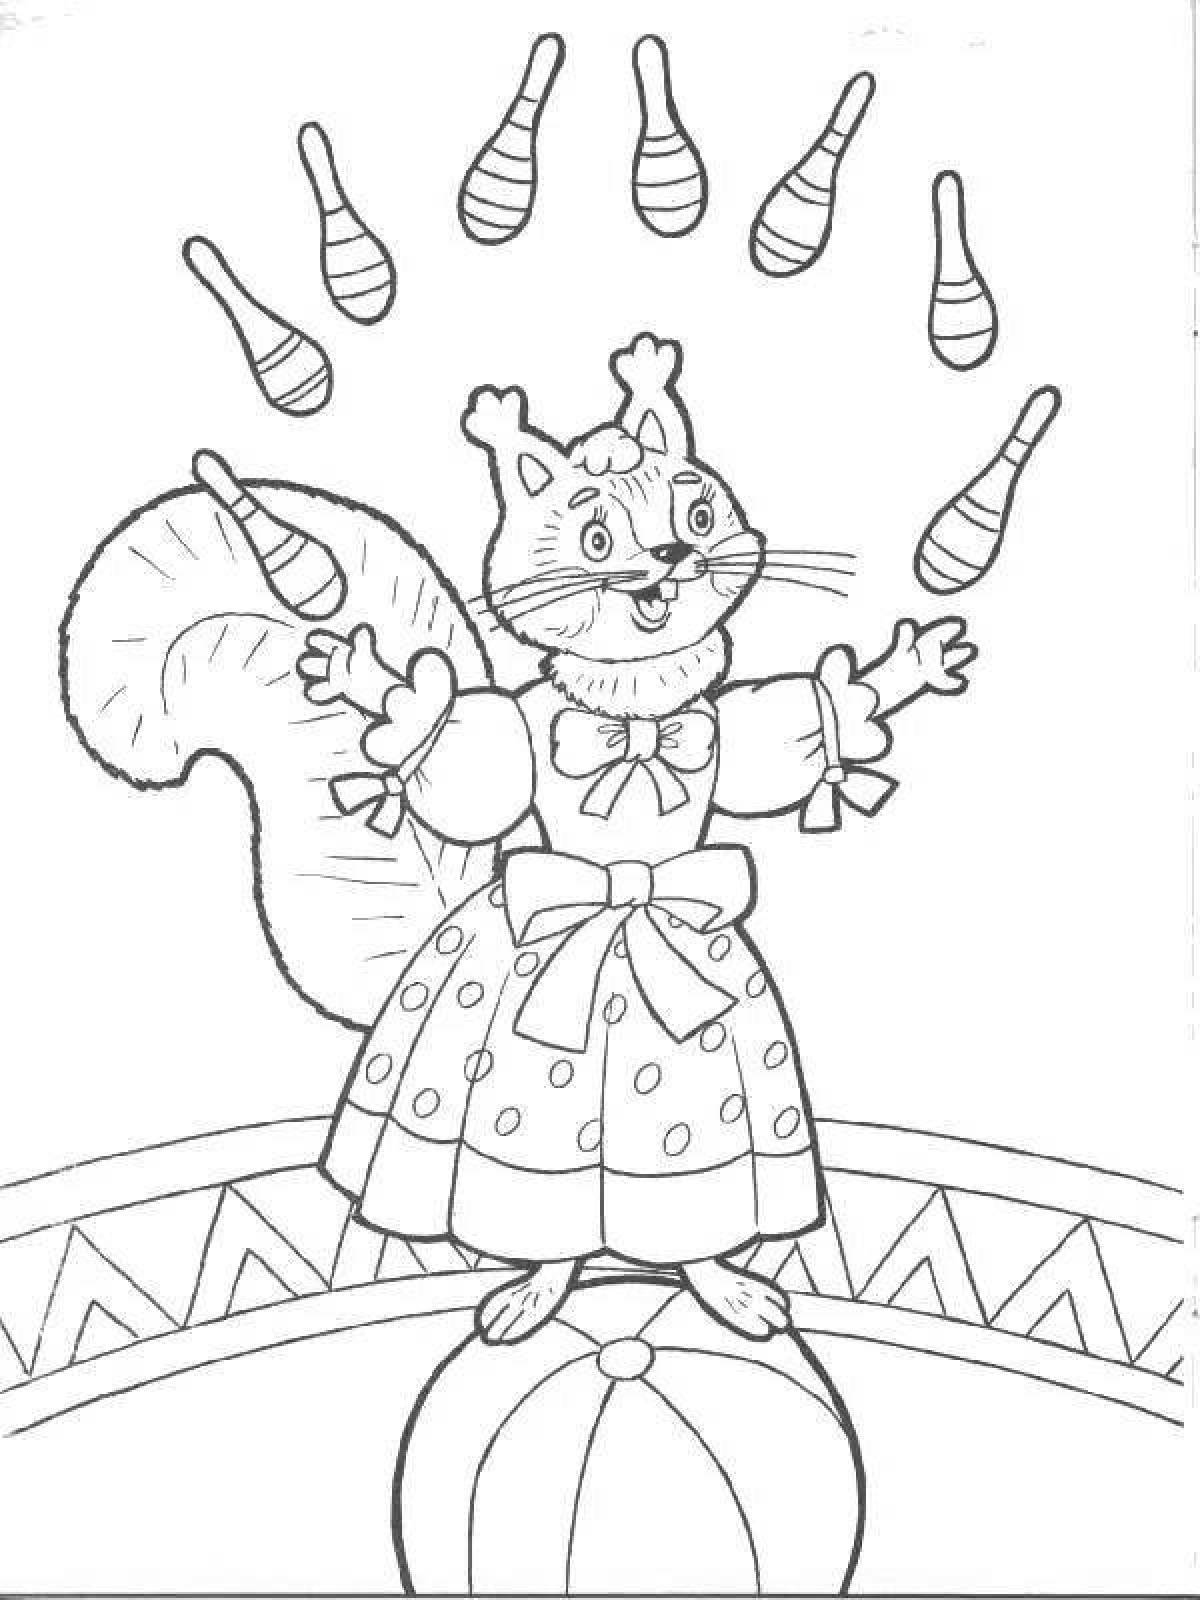 Adorable circus coloring book for kids 6-7 years old